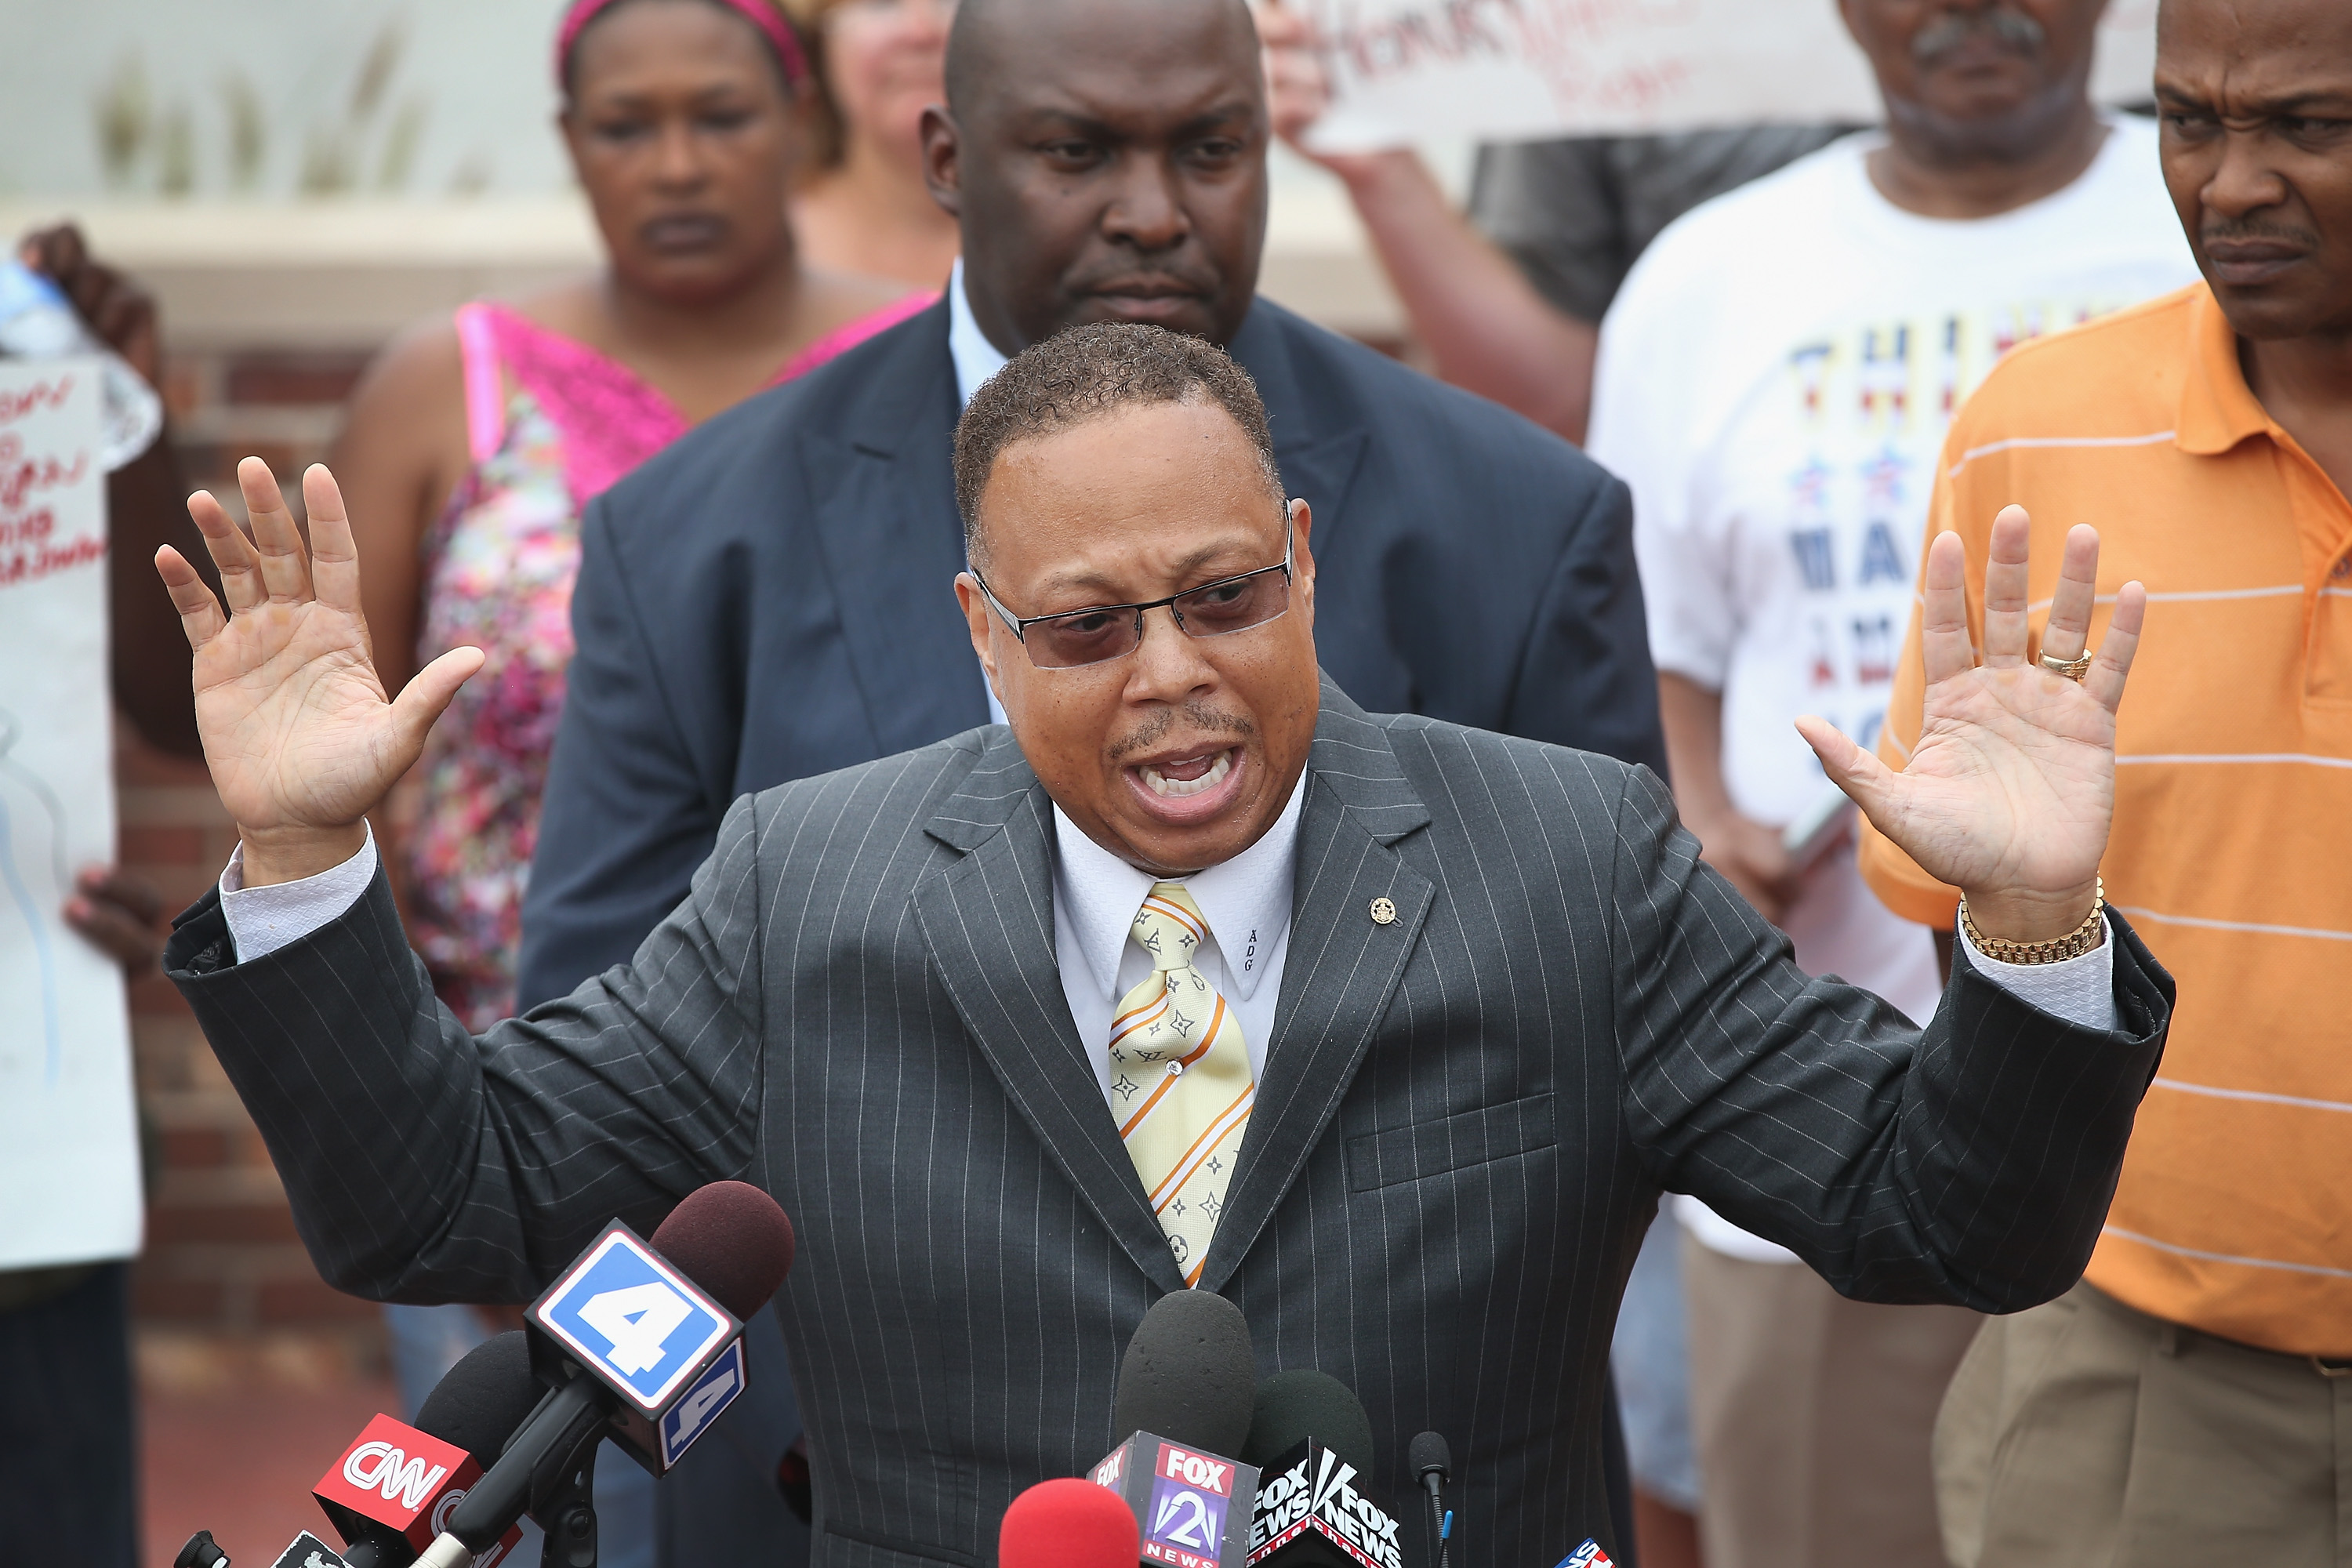 Daryl Parks, an attorney for the family of Michael Brown, addresses the media during a press conference outside the police department on August 15, 2014 in Ferguson, Missouri. 